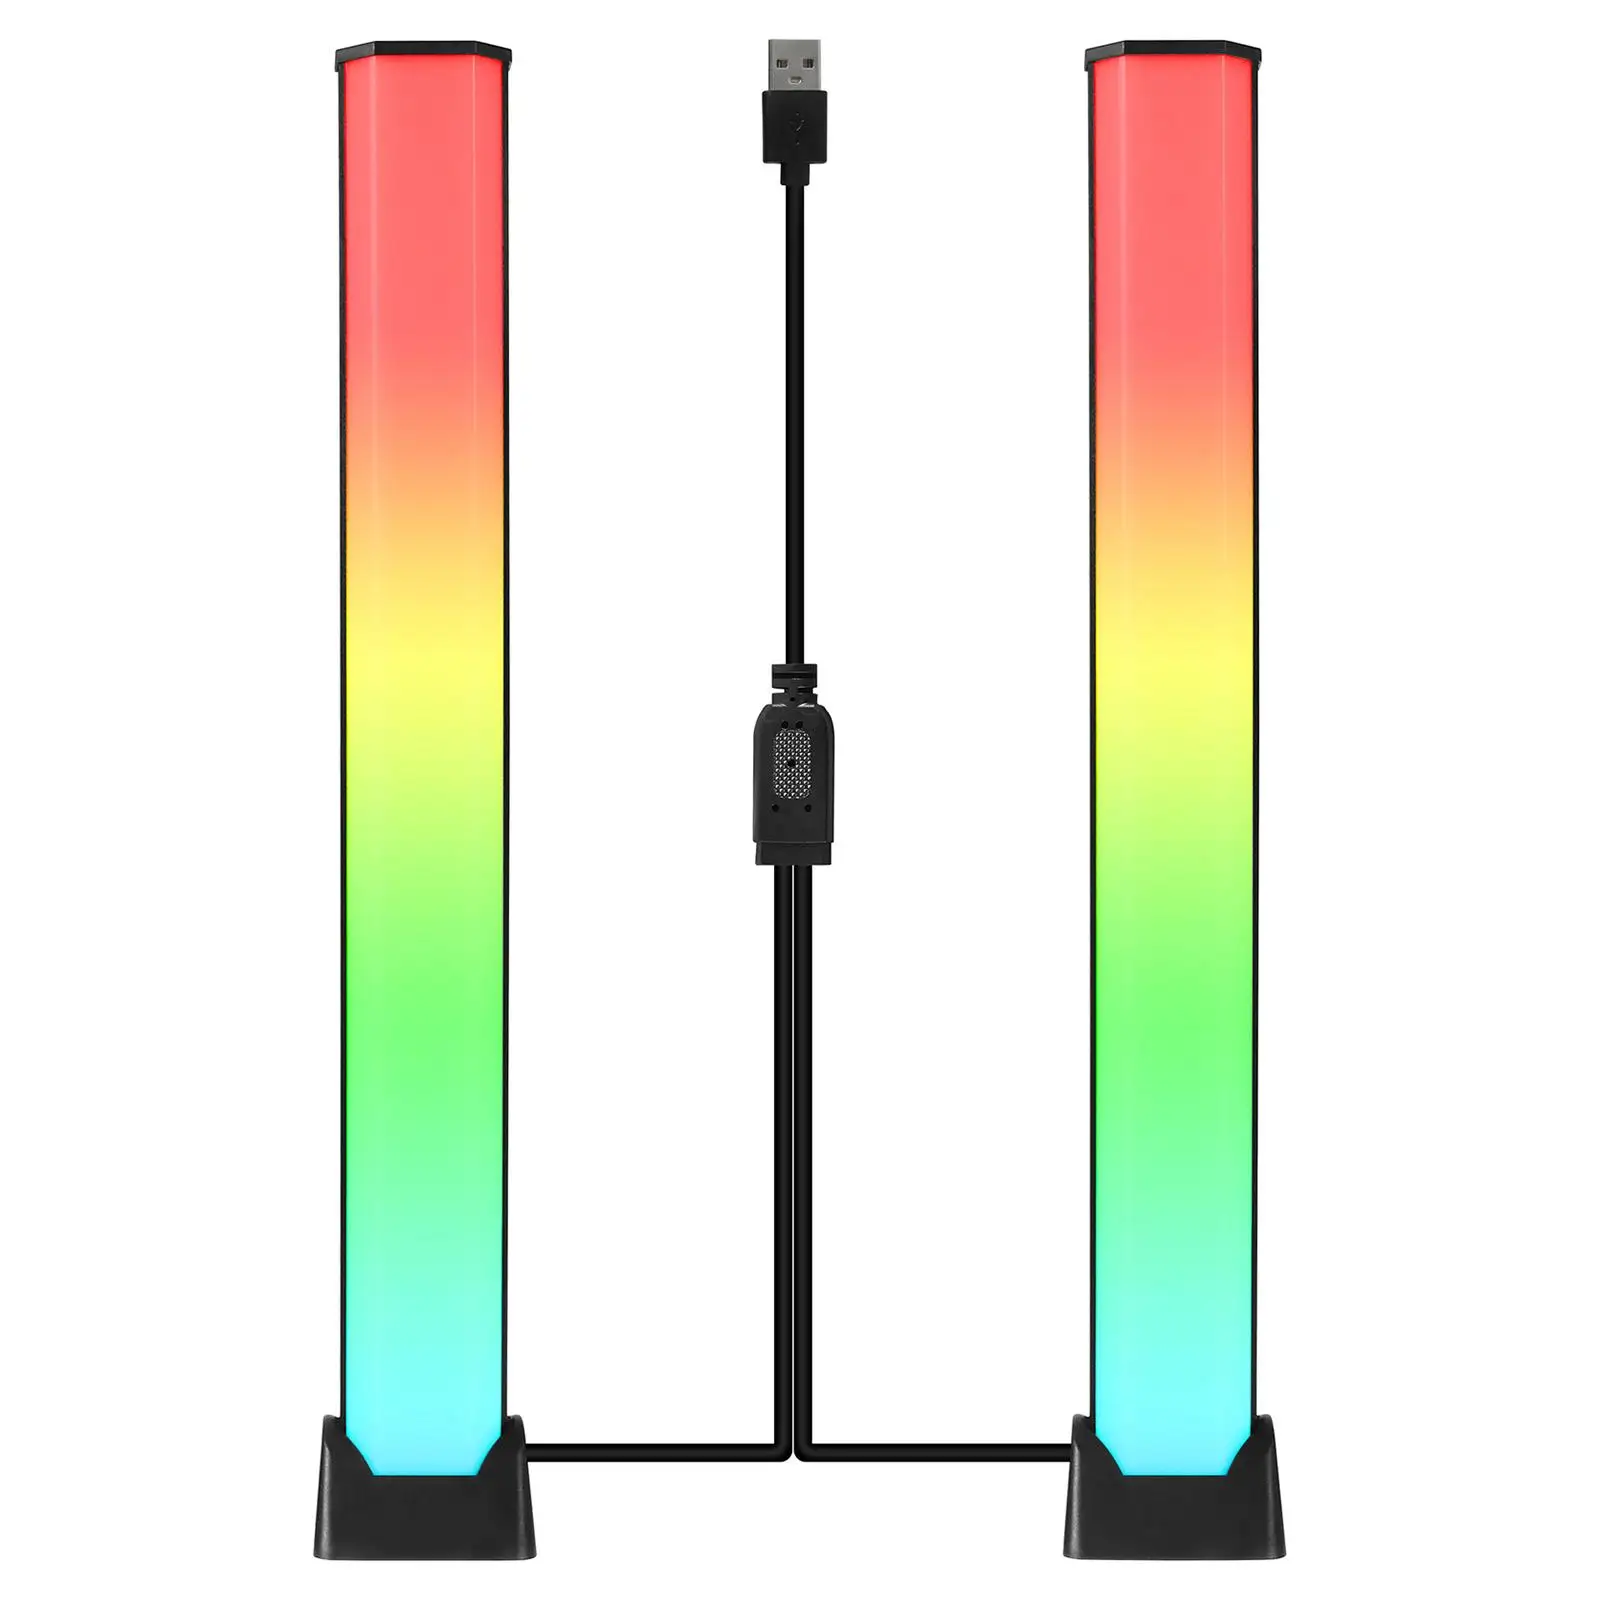 Modern RGB LED Ambient Light Atmosphere Lights Color Changing USB Table Lamp for Party Holiday Lighting PC TV Backlight Decor